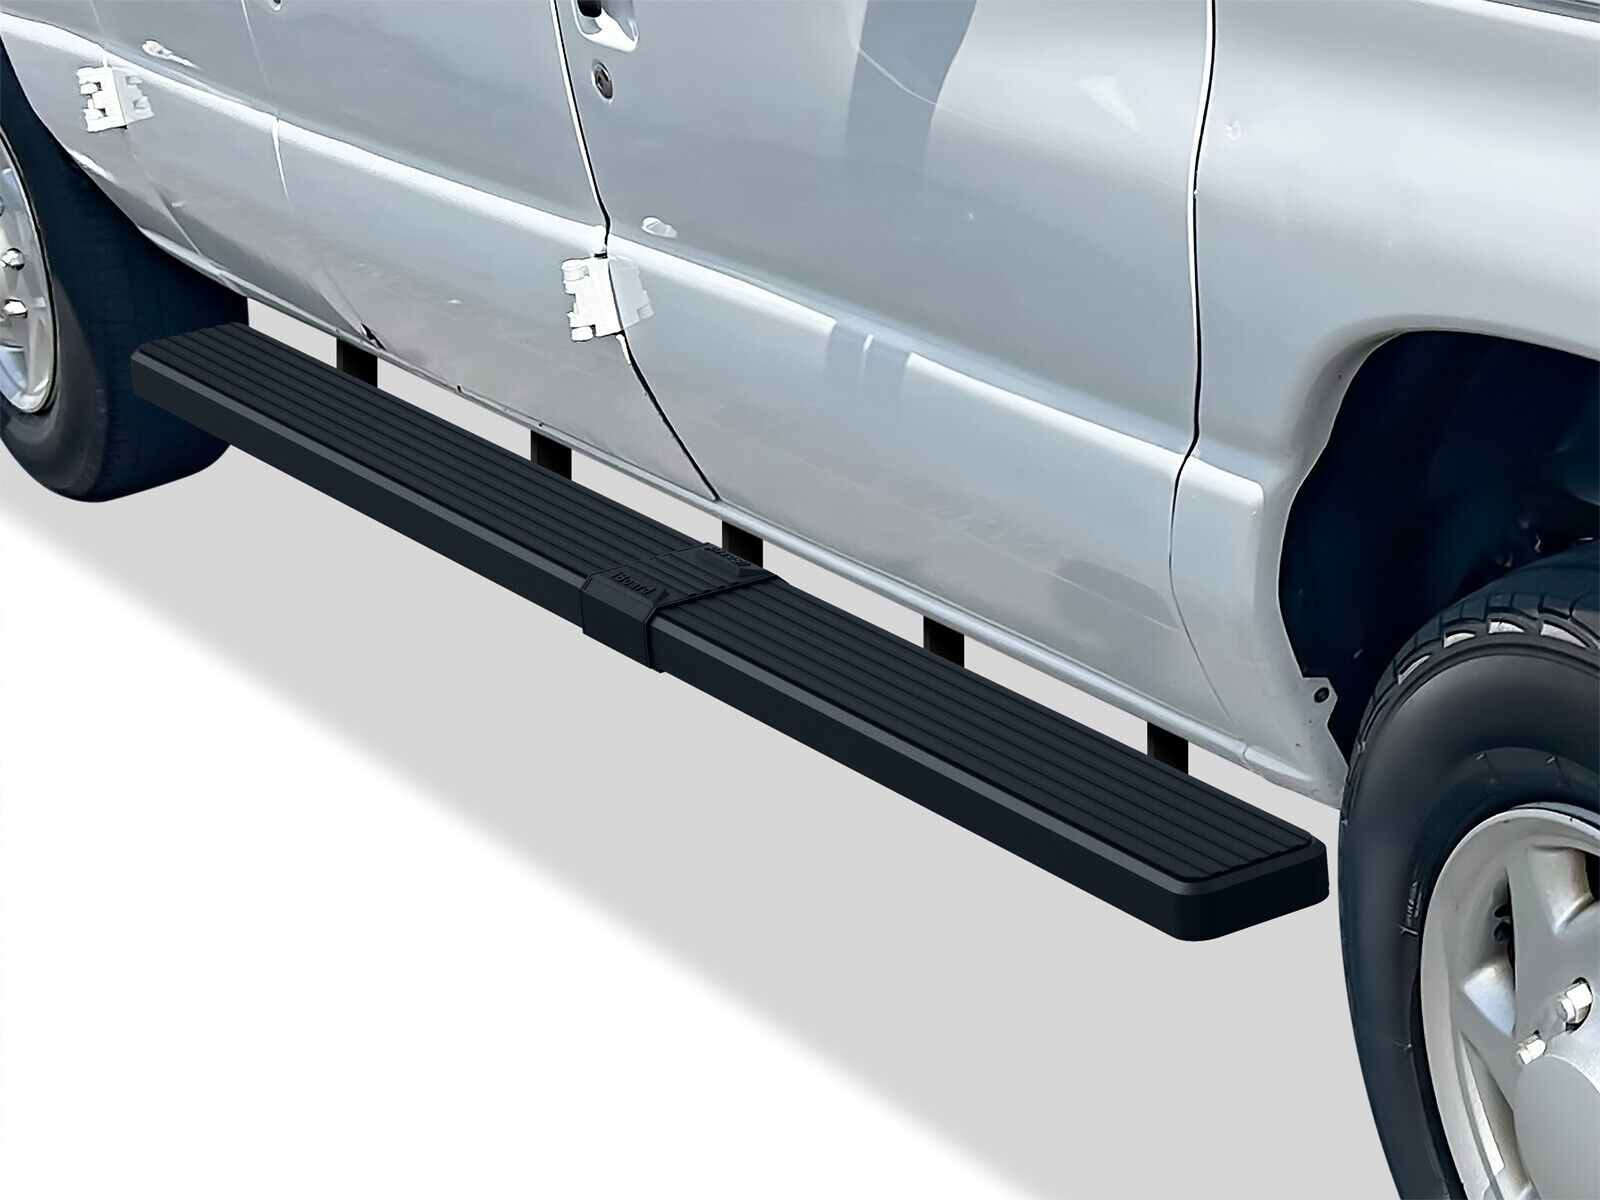 iBoard Stainless Steel 6in Running Boards Fit 99-14 Ford Econoline Full Size Van